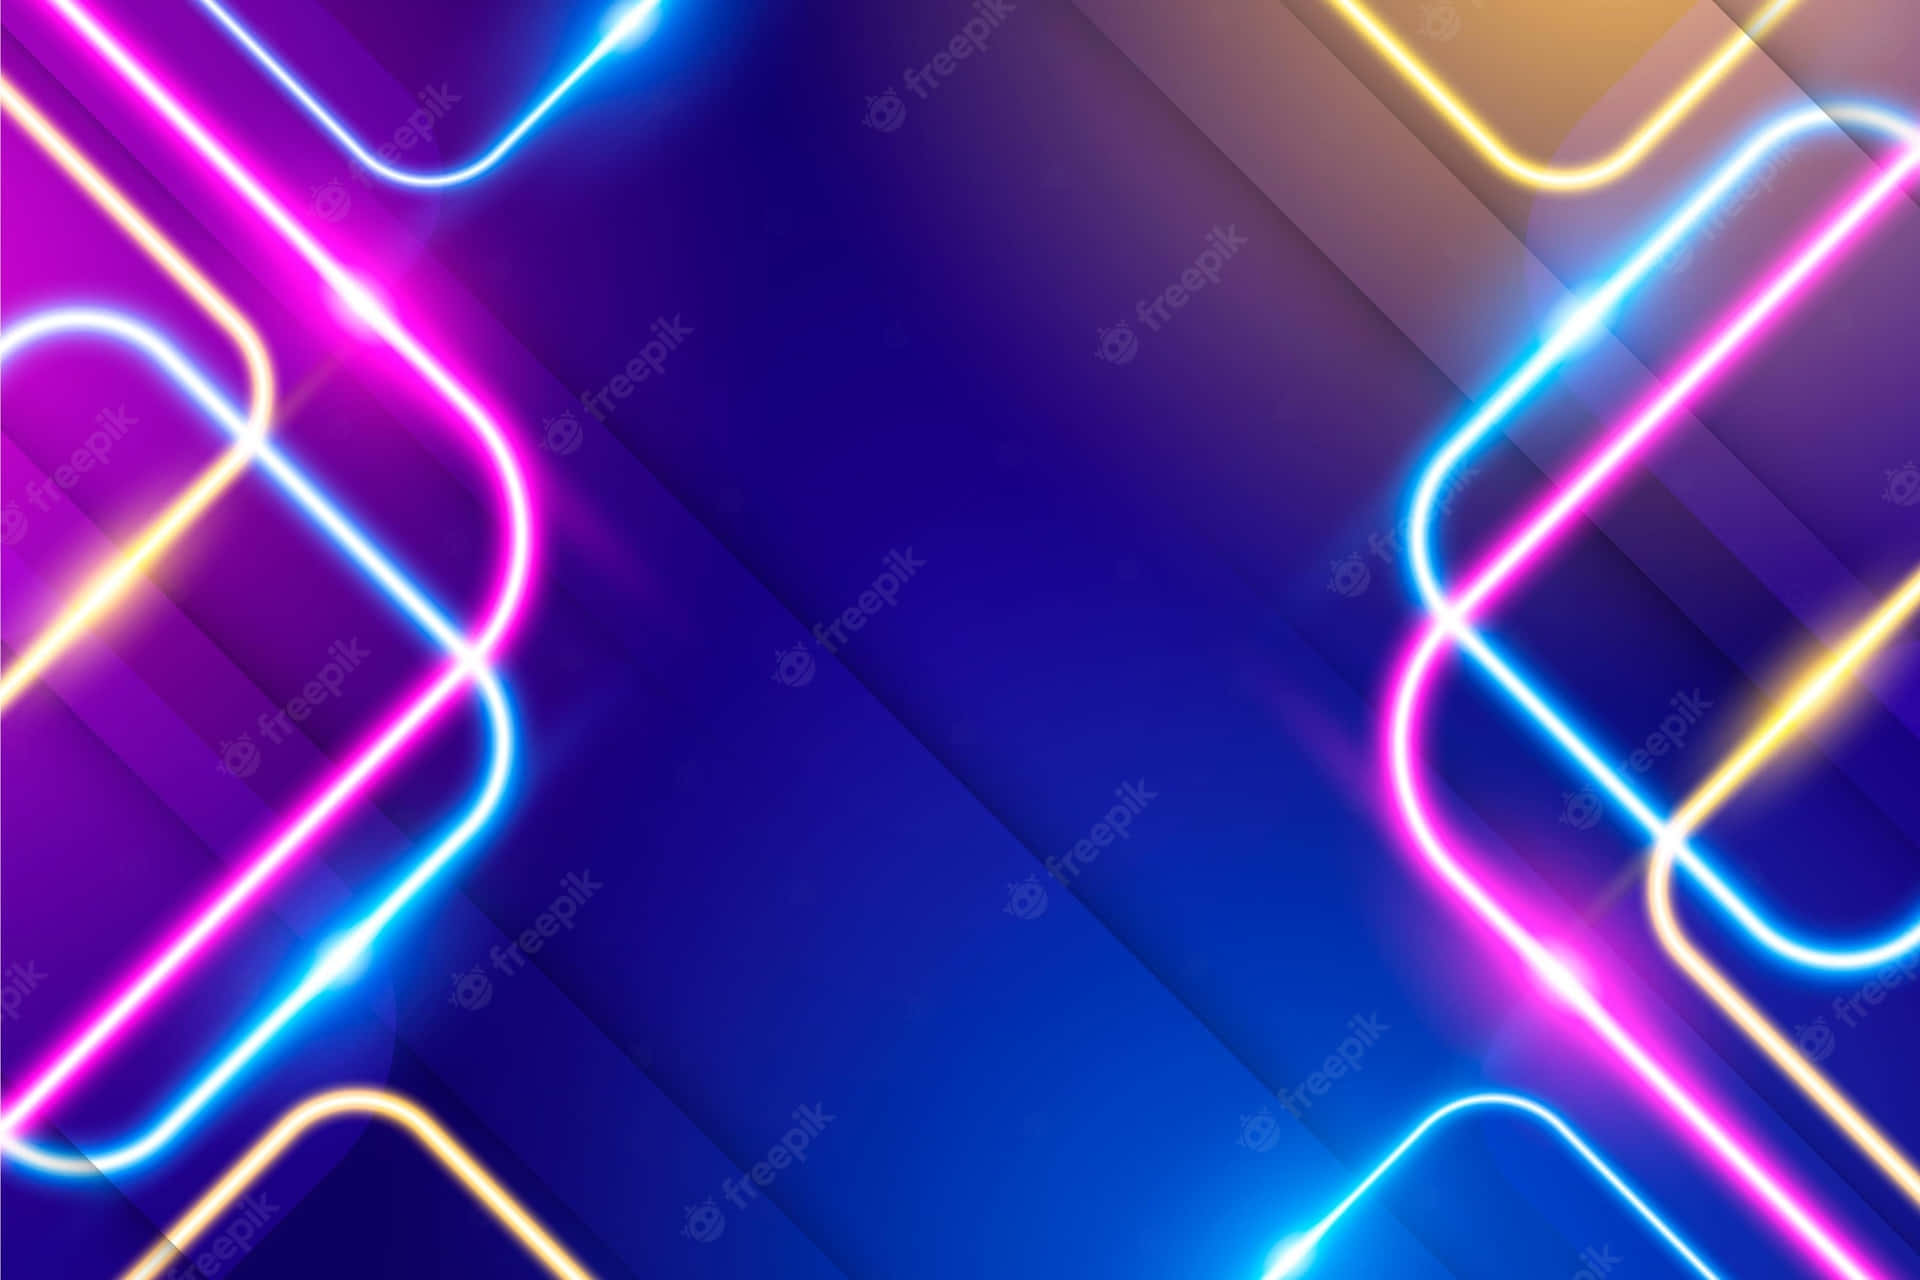 Colorful, Bright, and Engaging HD Abstract Neon Wallpaper